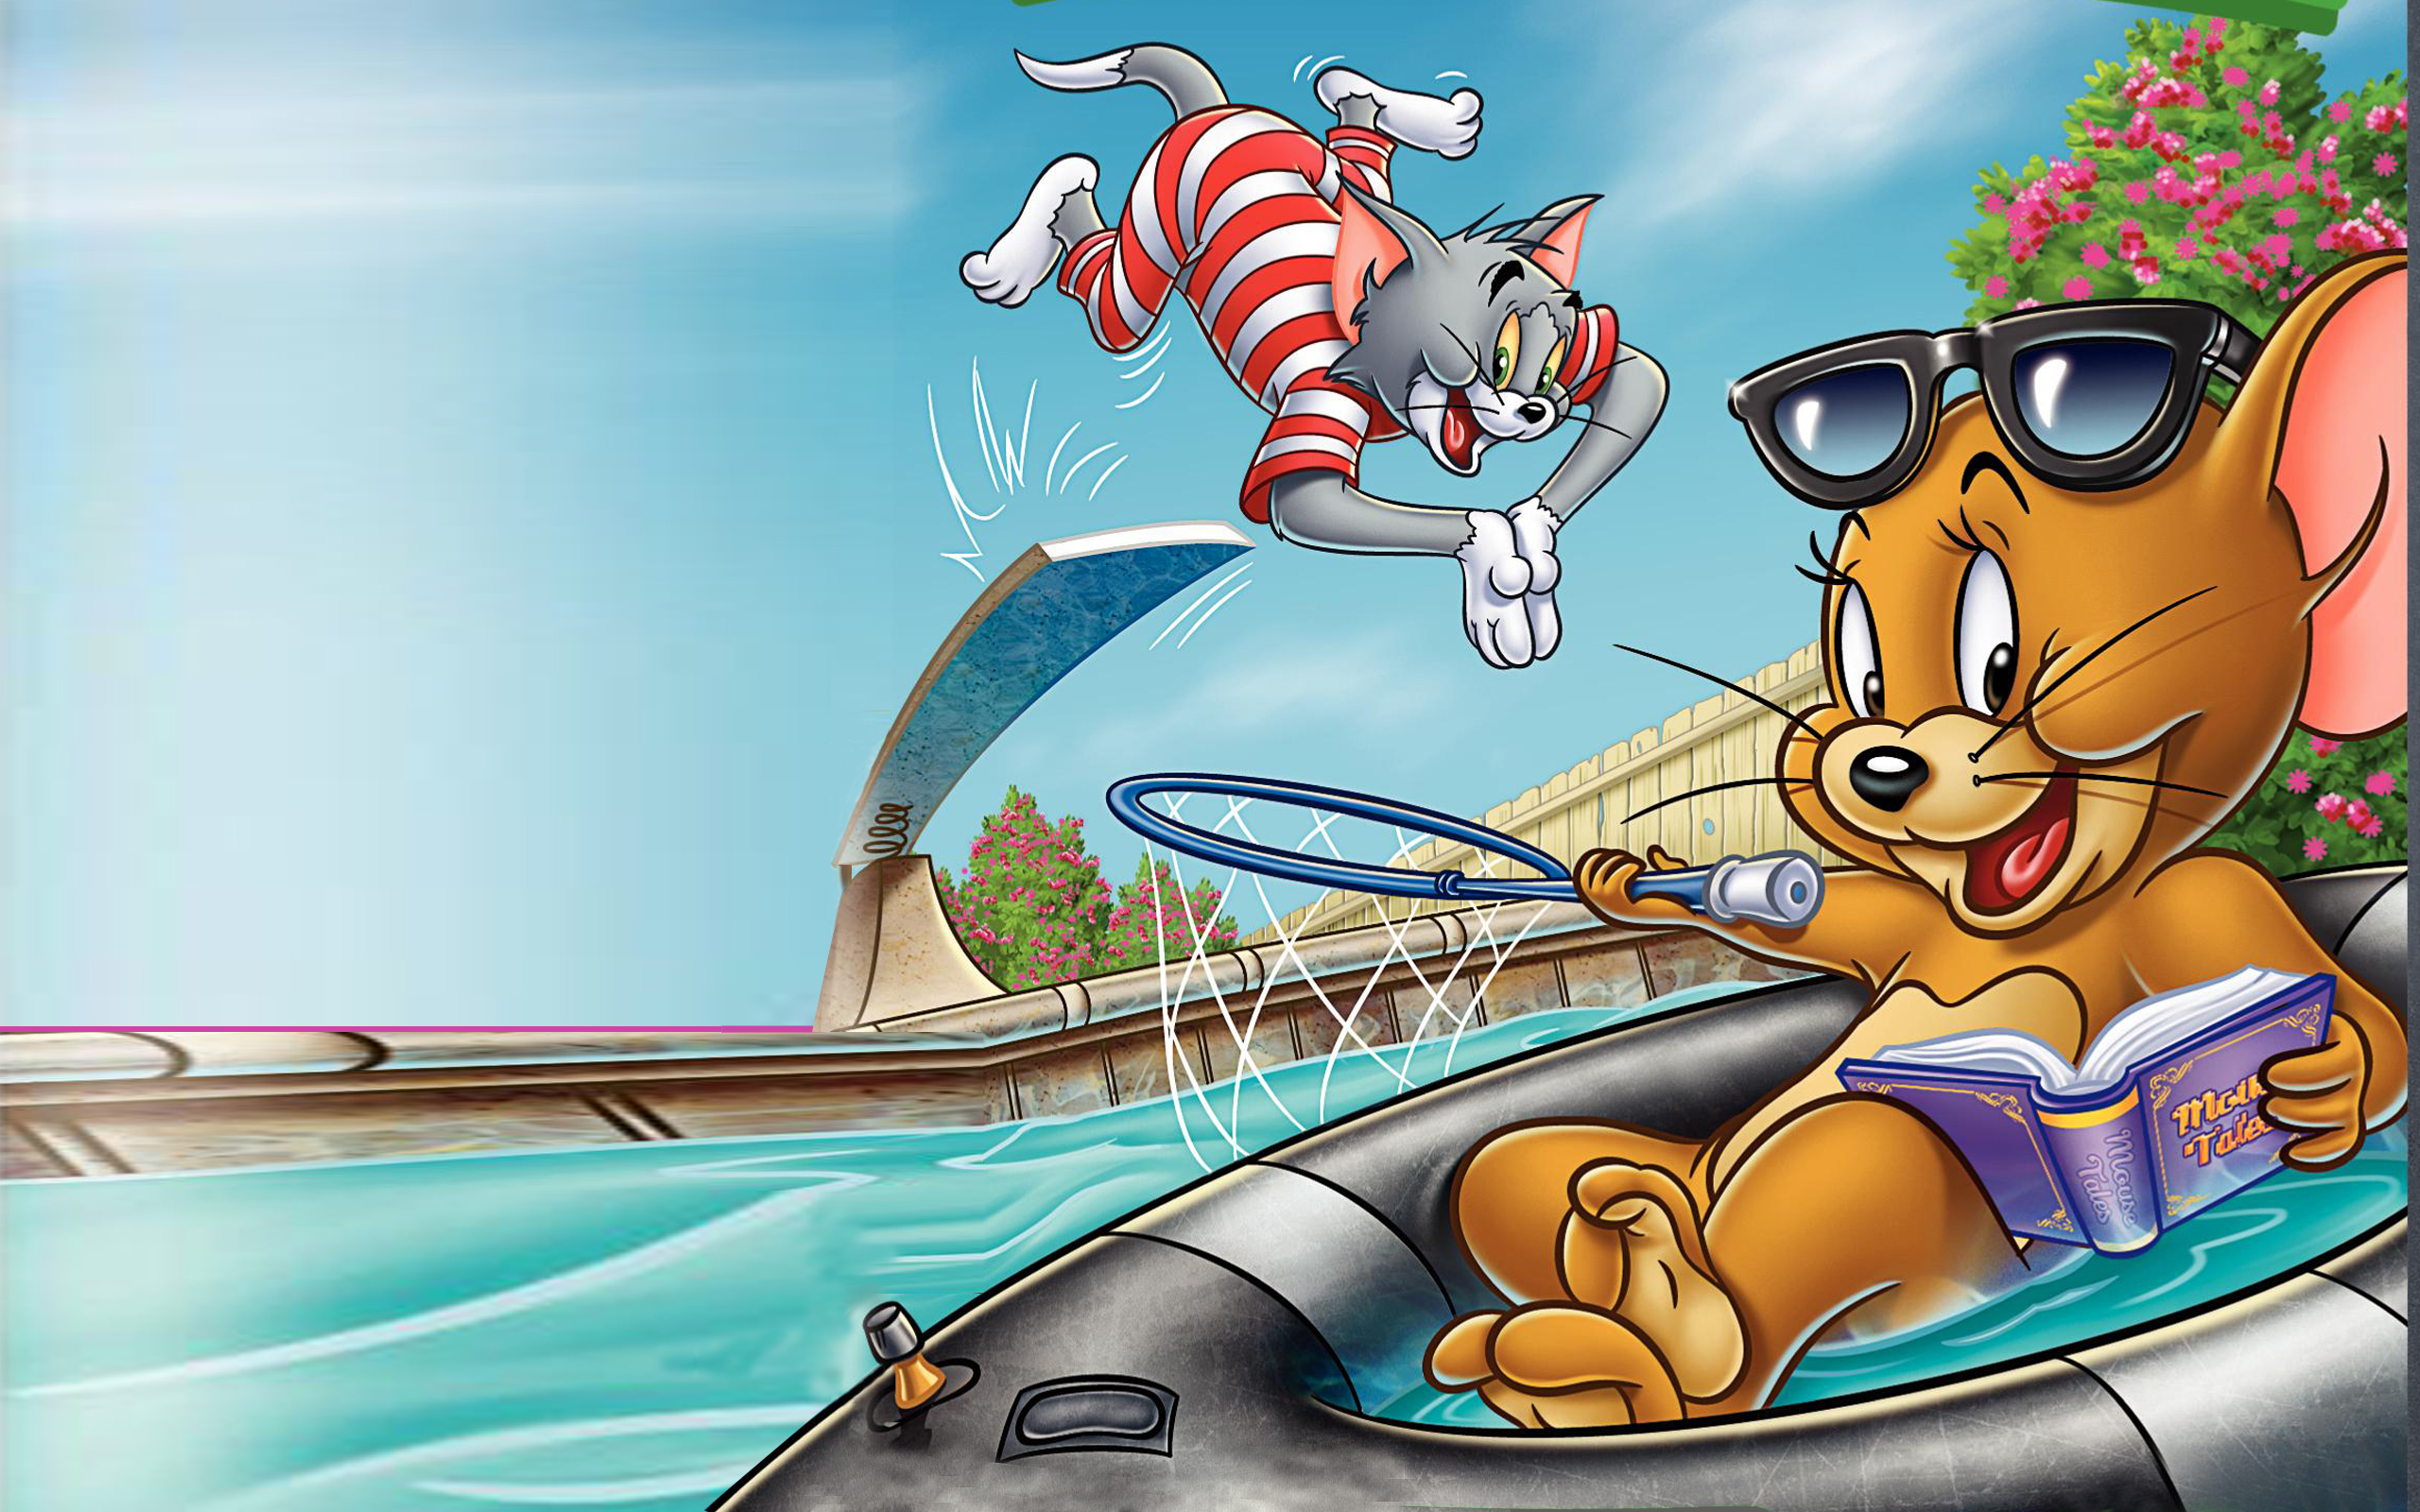 Tom And Jerry Fur Flying Adv V2 Hd Wallpapers For Mobile Phones Tablet